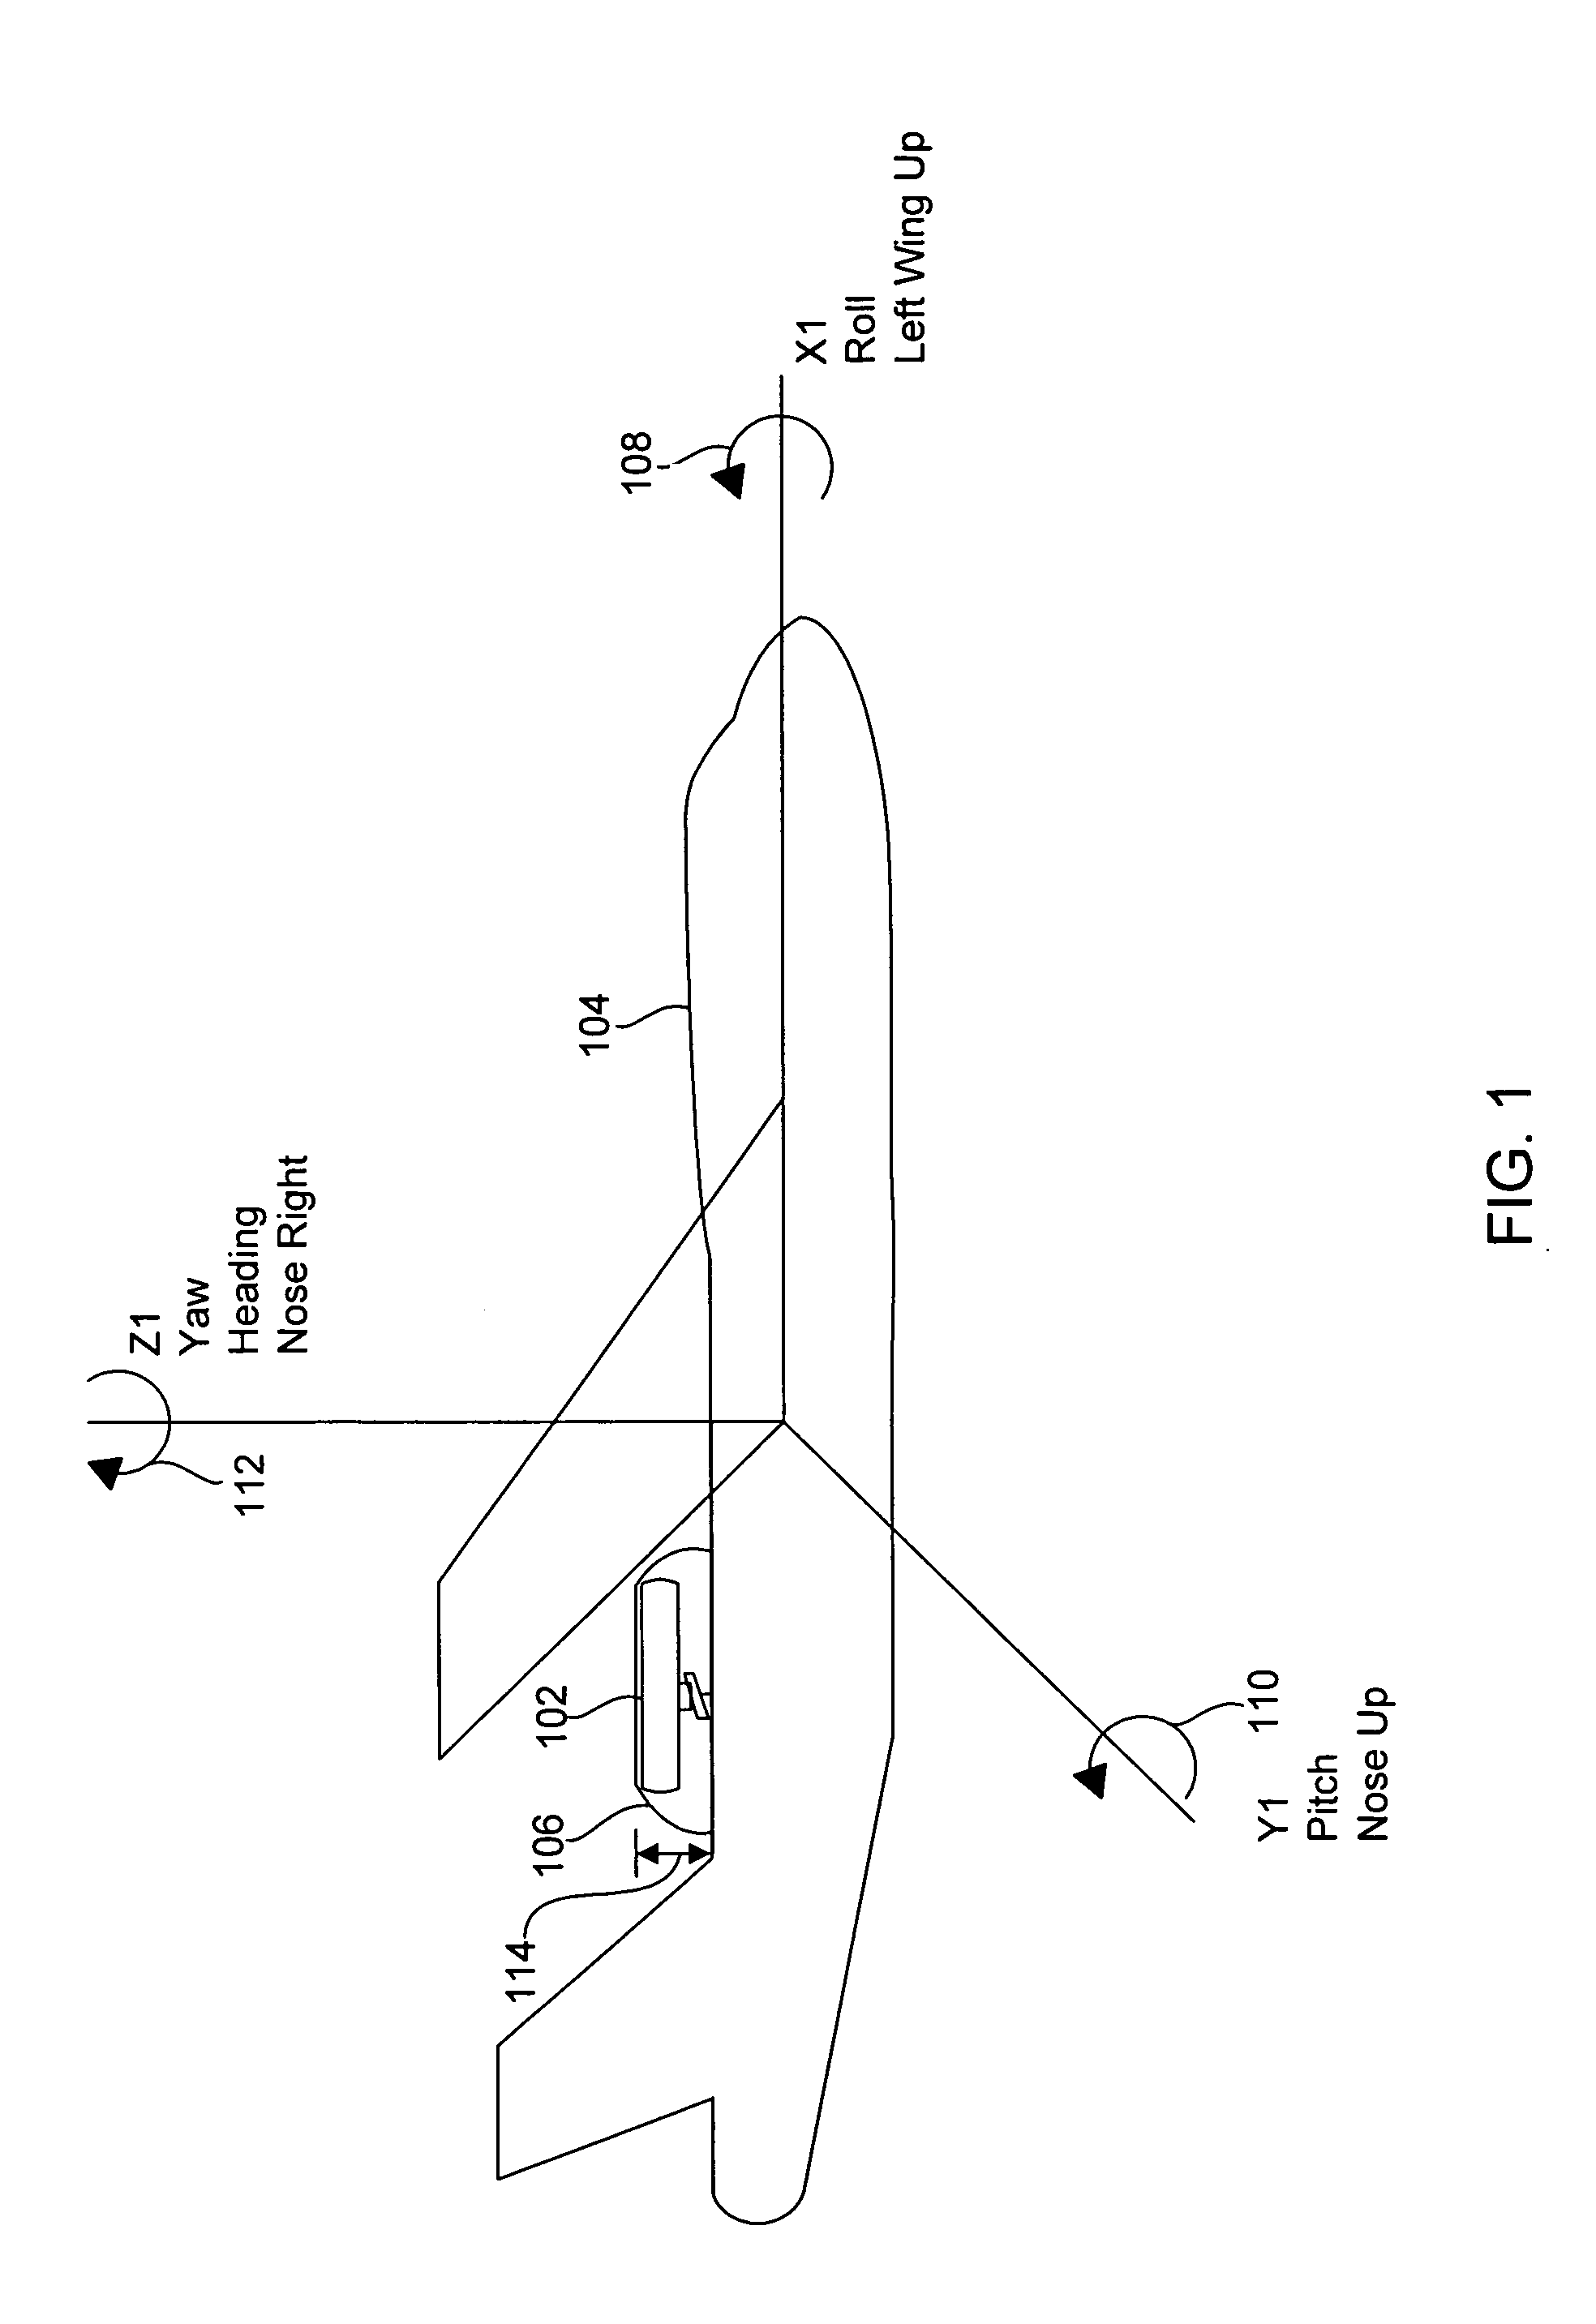 System and method for pointing and control of an antenna